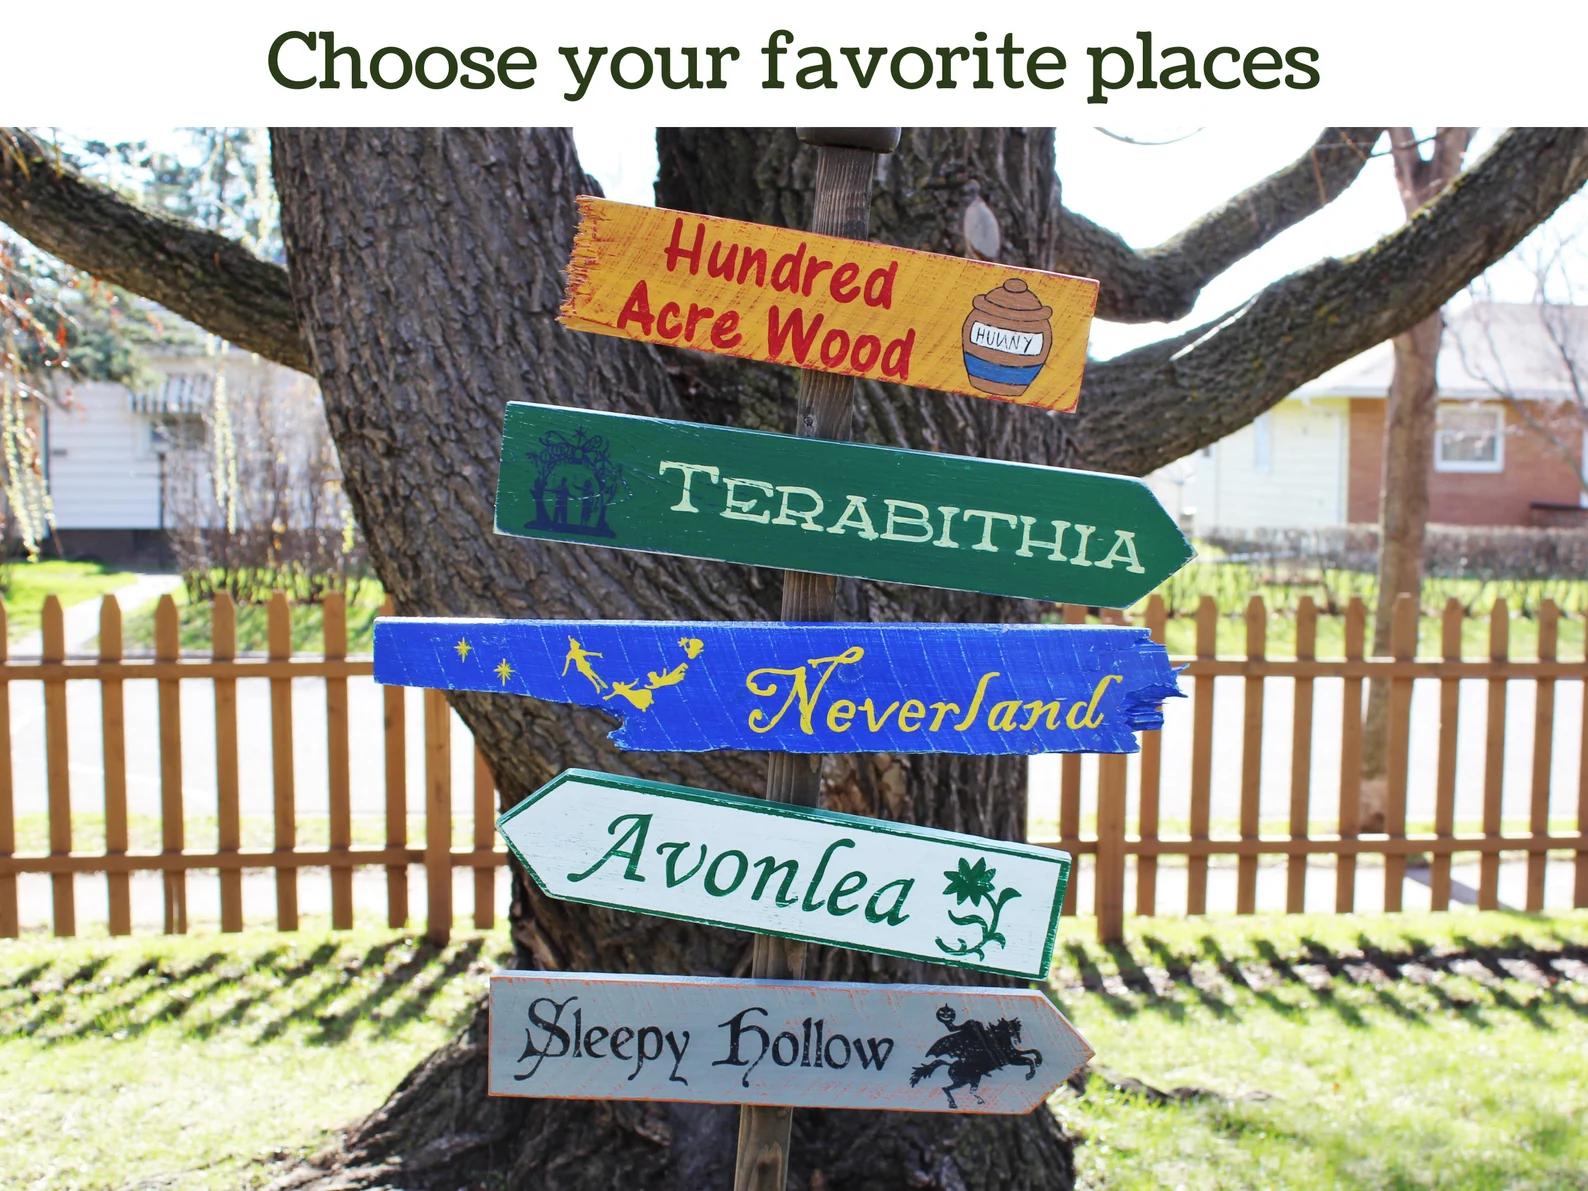 Several colorful hand-painted wooden signs are nailed to a large tree. Places names from books—Hundred Acre Wood, Terabithia, Neverland, Avonlea, Sleepy Hollow—are written on each sign in different fonts.